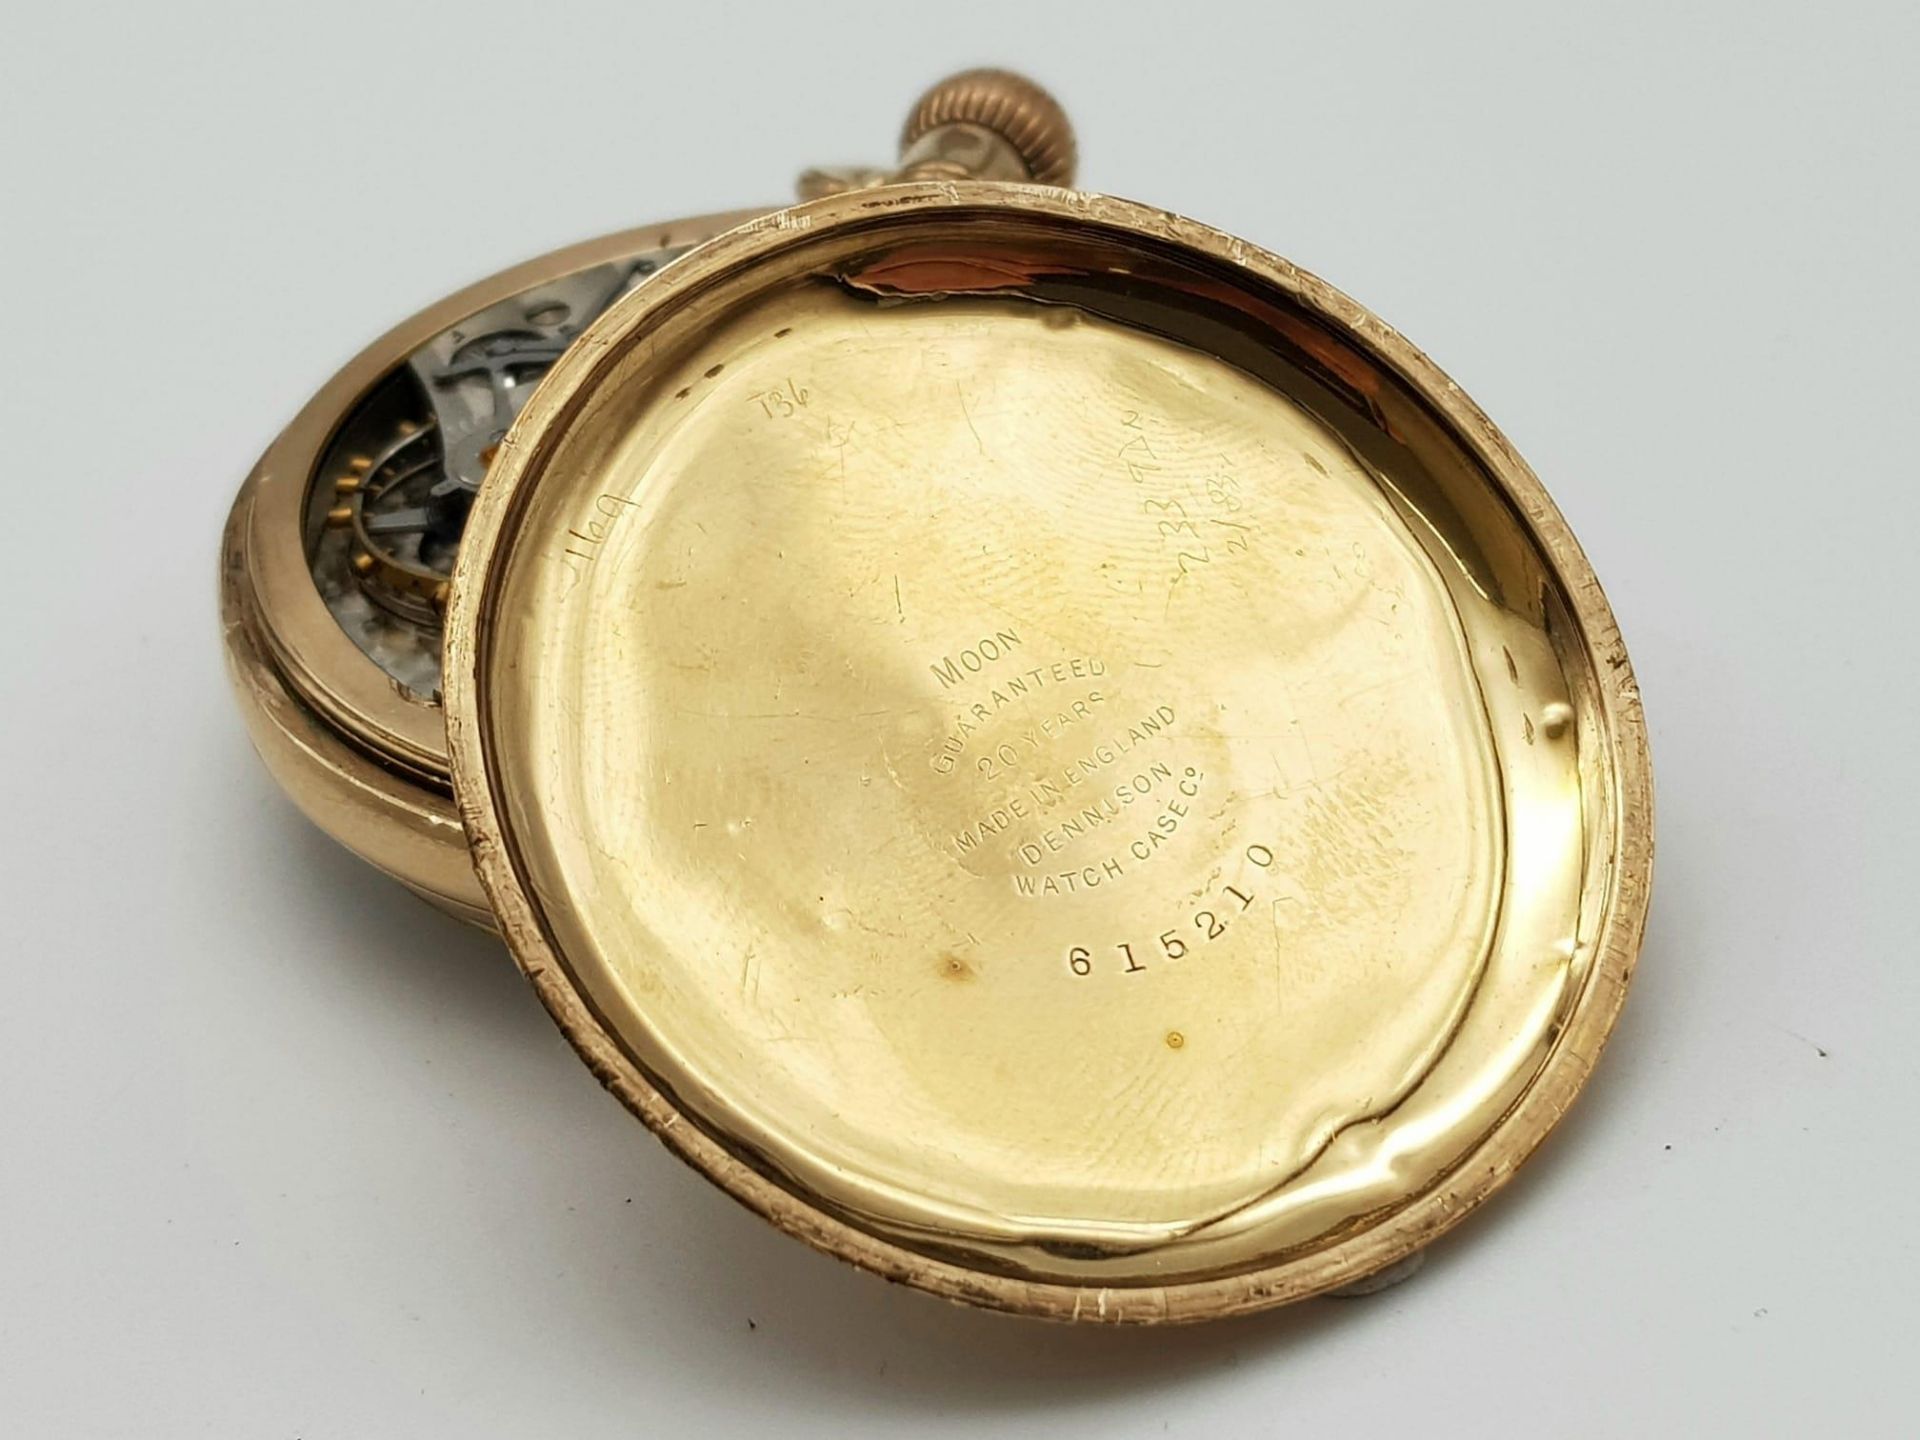 An Antique (1915) Gold Plated Hampden Watch Co. Pocket Watch. 21 jewels. 3328478 movement. Top - Image 5 of 5